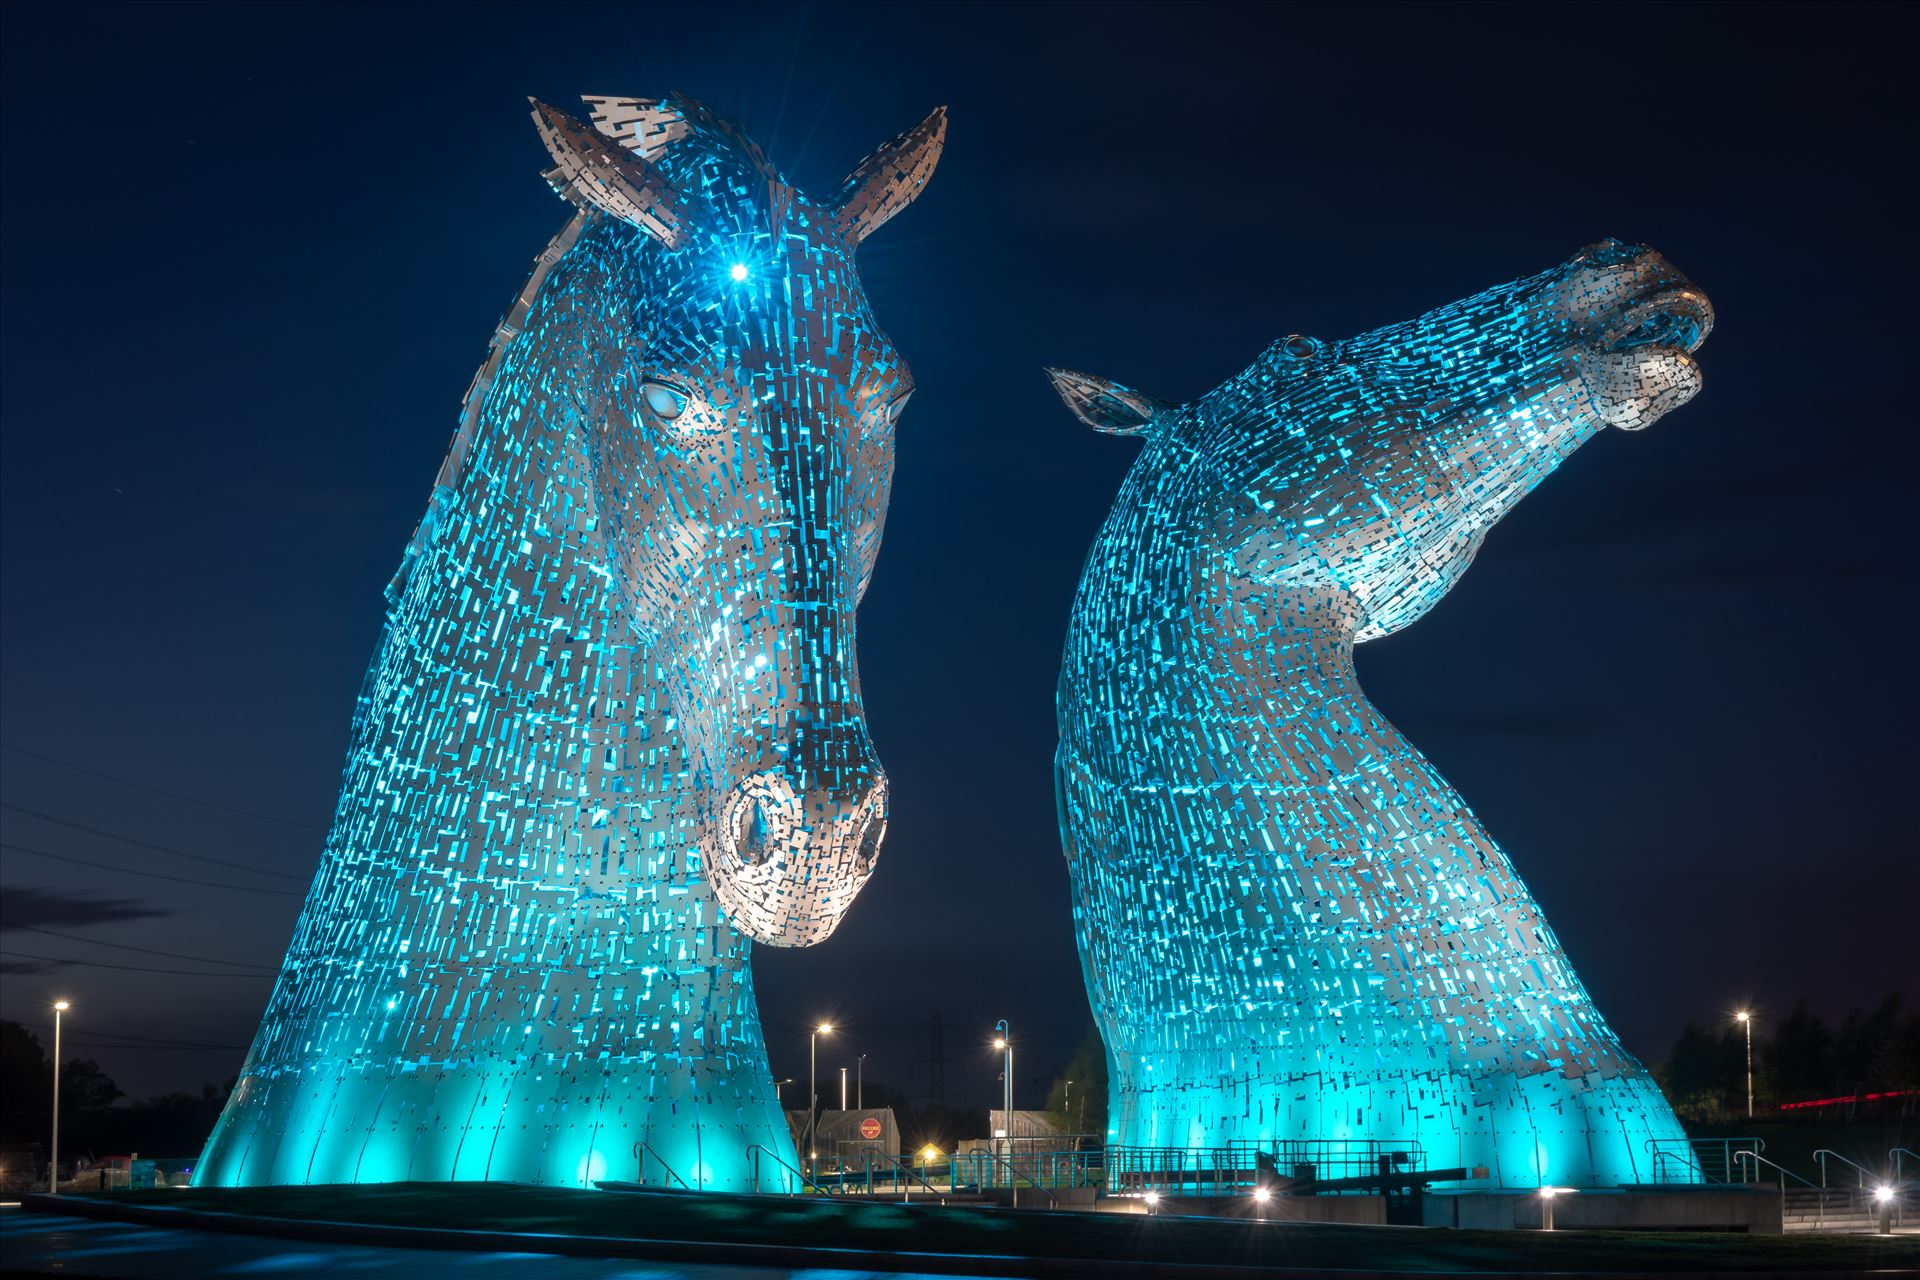 The Kelpies, Falkirk, Scotland - Blue Built of structural steel with a stainless steel cladding, The Kelpies are 30 metres high and weigh 300 tonnes each. Construction began in June 2013 by Graham Dobson Photography